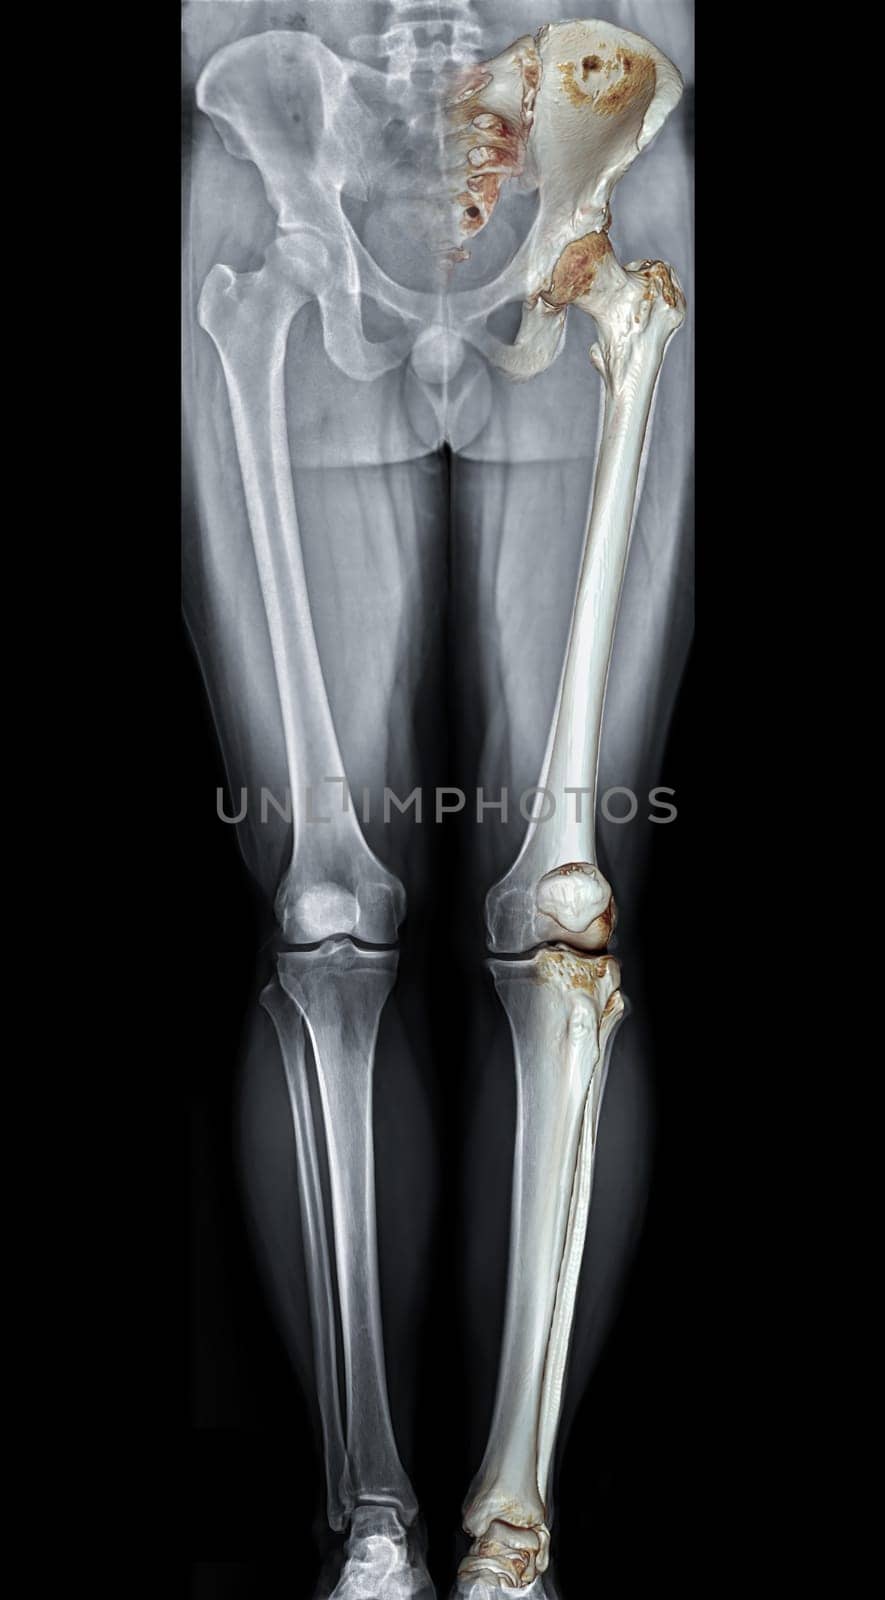 Scanogram is a Full-length standing AP radiograph of both lower extremities including the hip, knee, and ankle with 3D rendering. by samunella